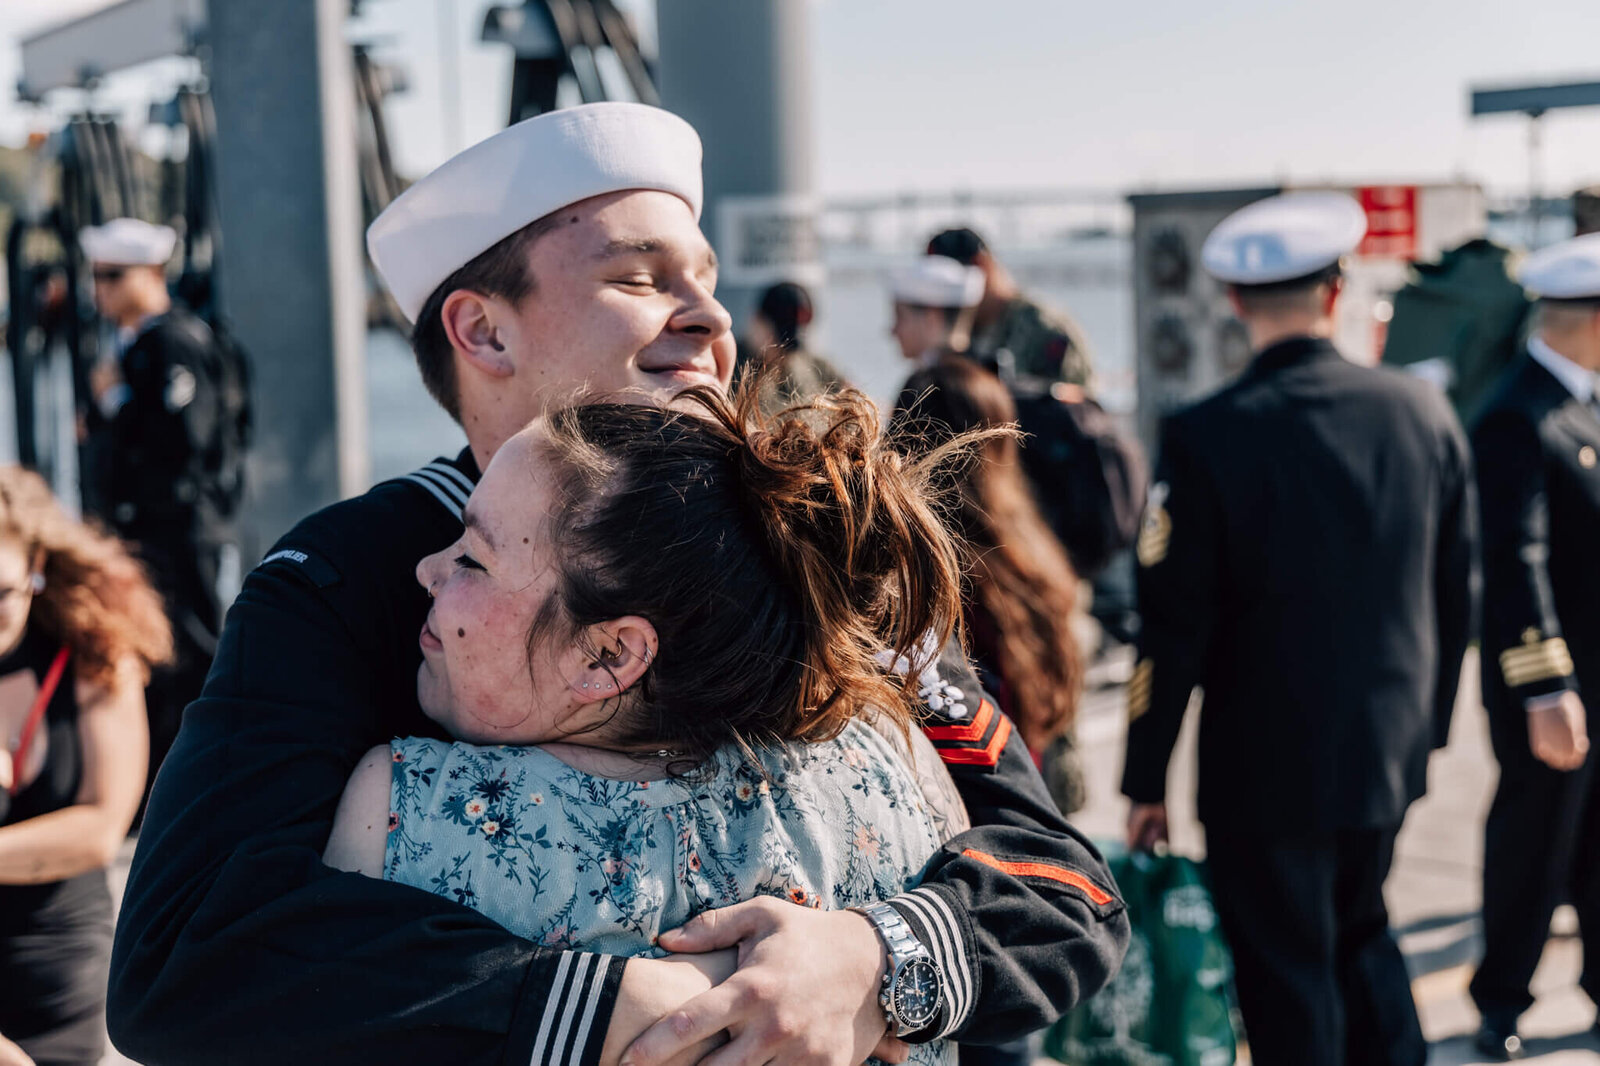 Sailor and woman embrace on pier during USS Montpelier Homecoming at SUBASE New London in Groton CT